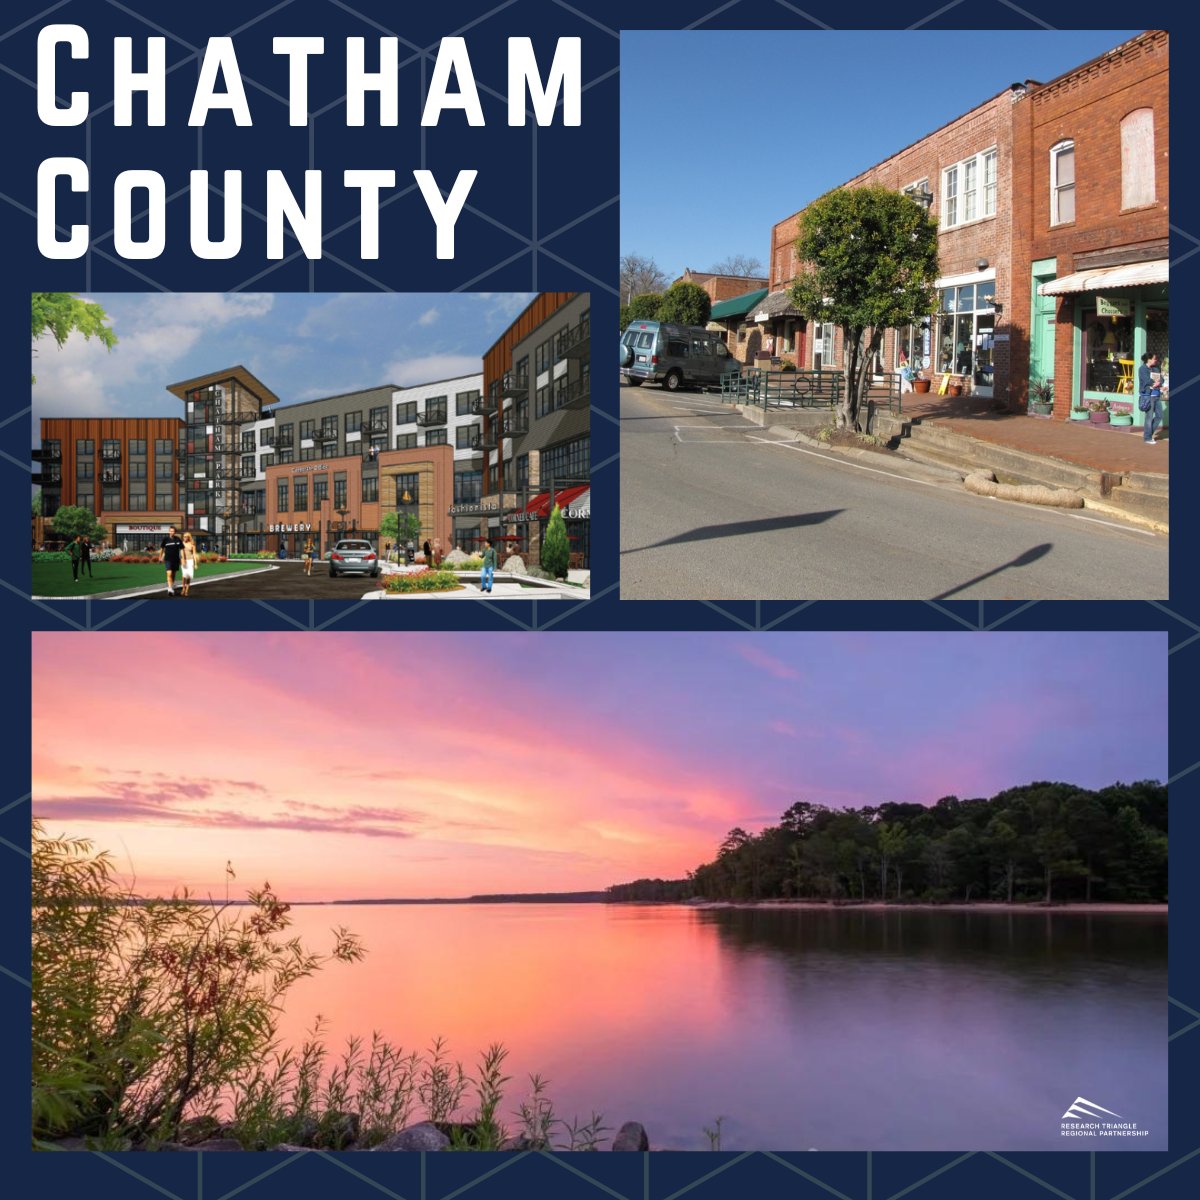 Chatham County has quickly become one of the state’s fastest-growing counties. Located just a few miles from the Research Triangle – Chatham County is an attractive place to live and do business. Read more about Chatham County: researchtriangle.org/counties/chath…